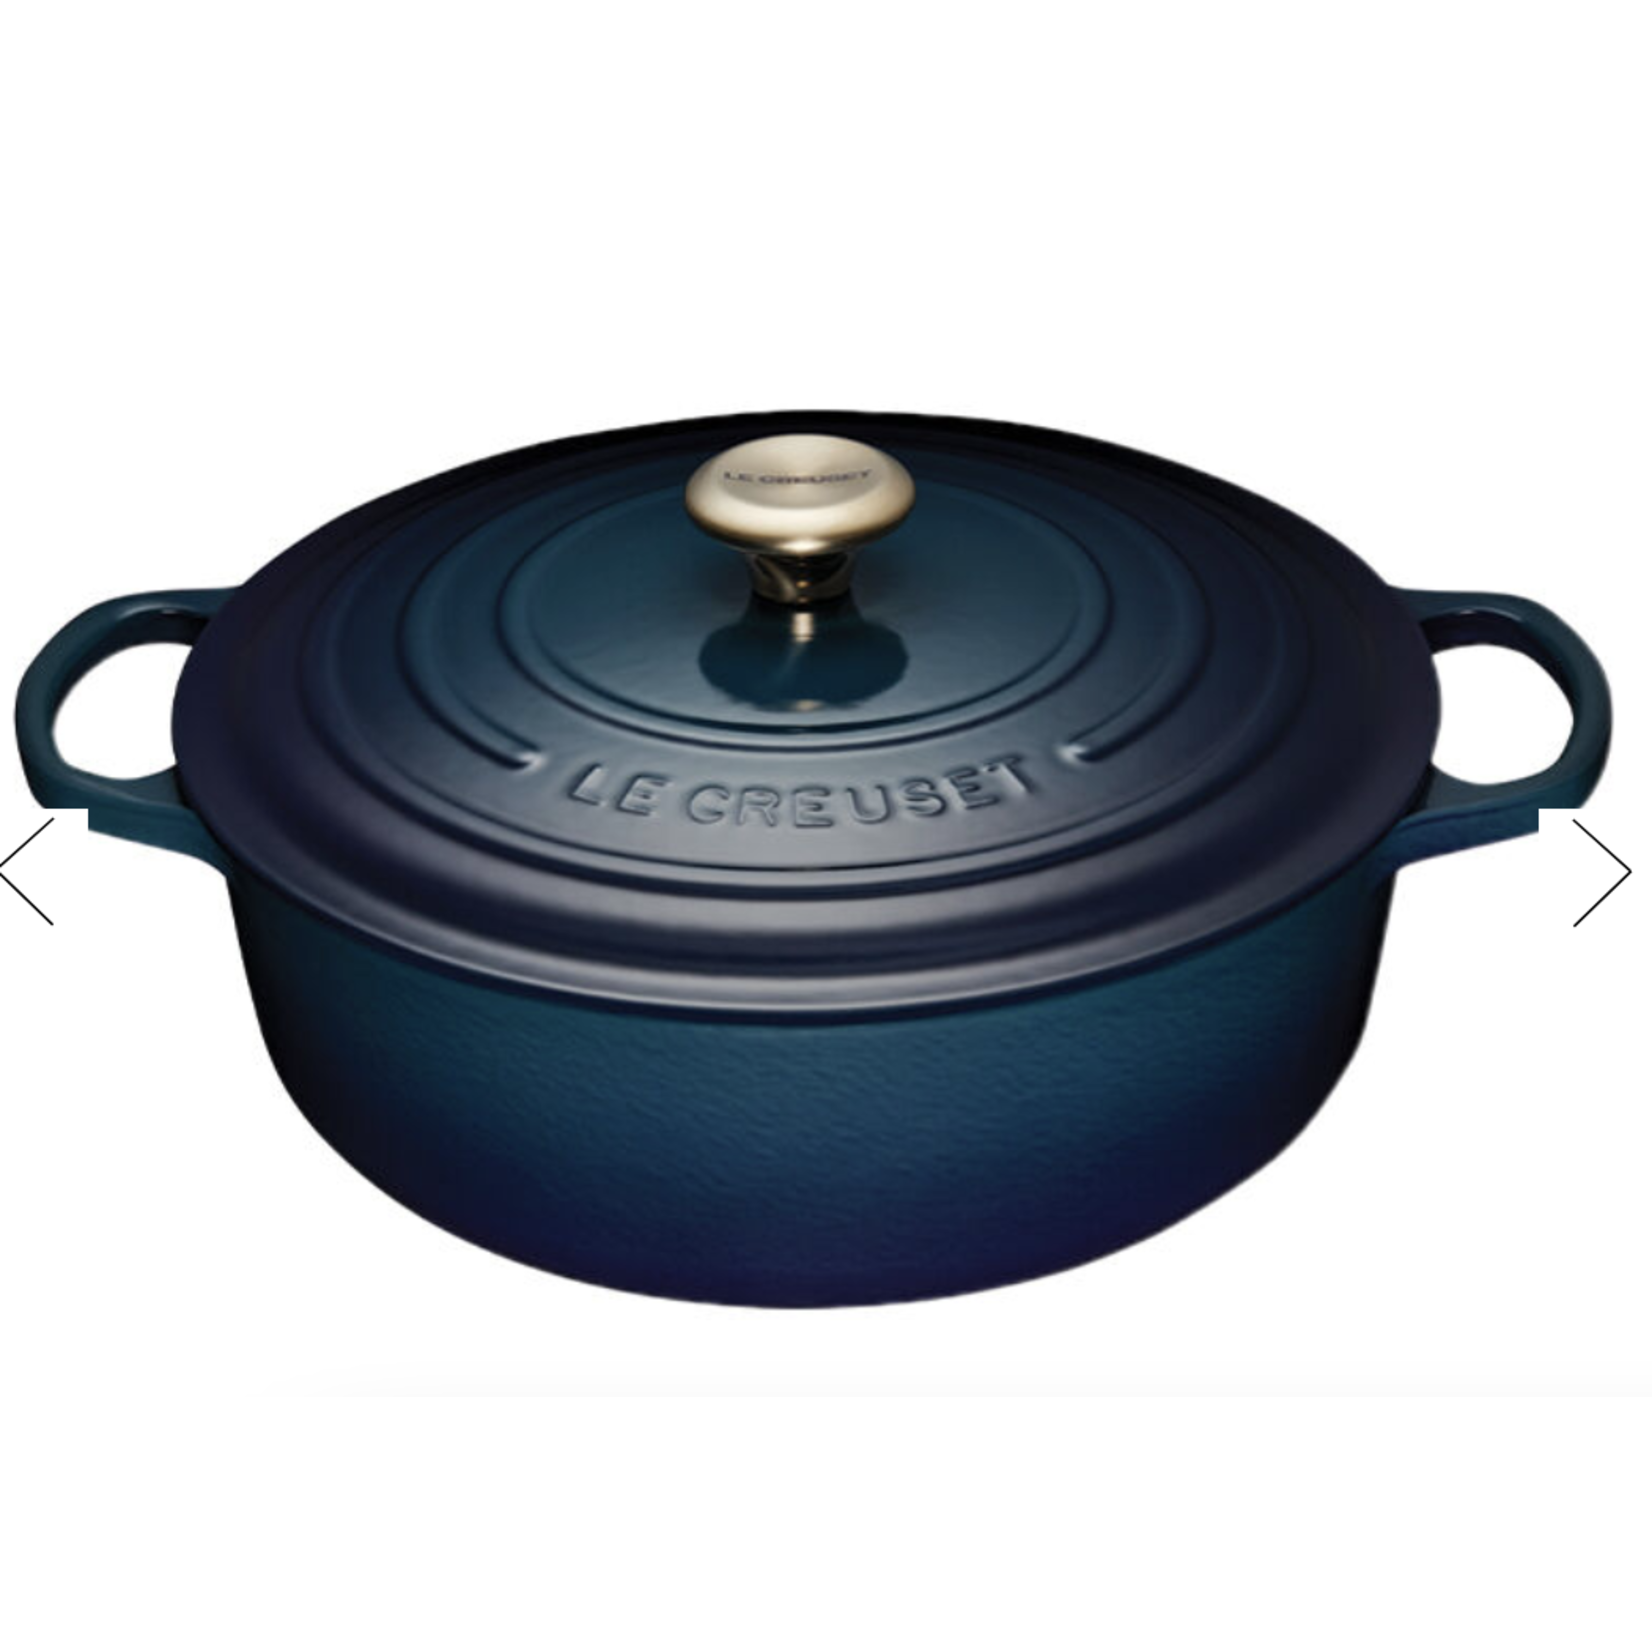 LE CREUSET LE CREUSET Shallow Round French Oven 6.2L